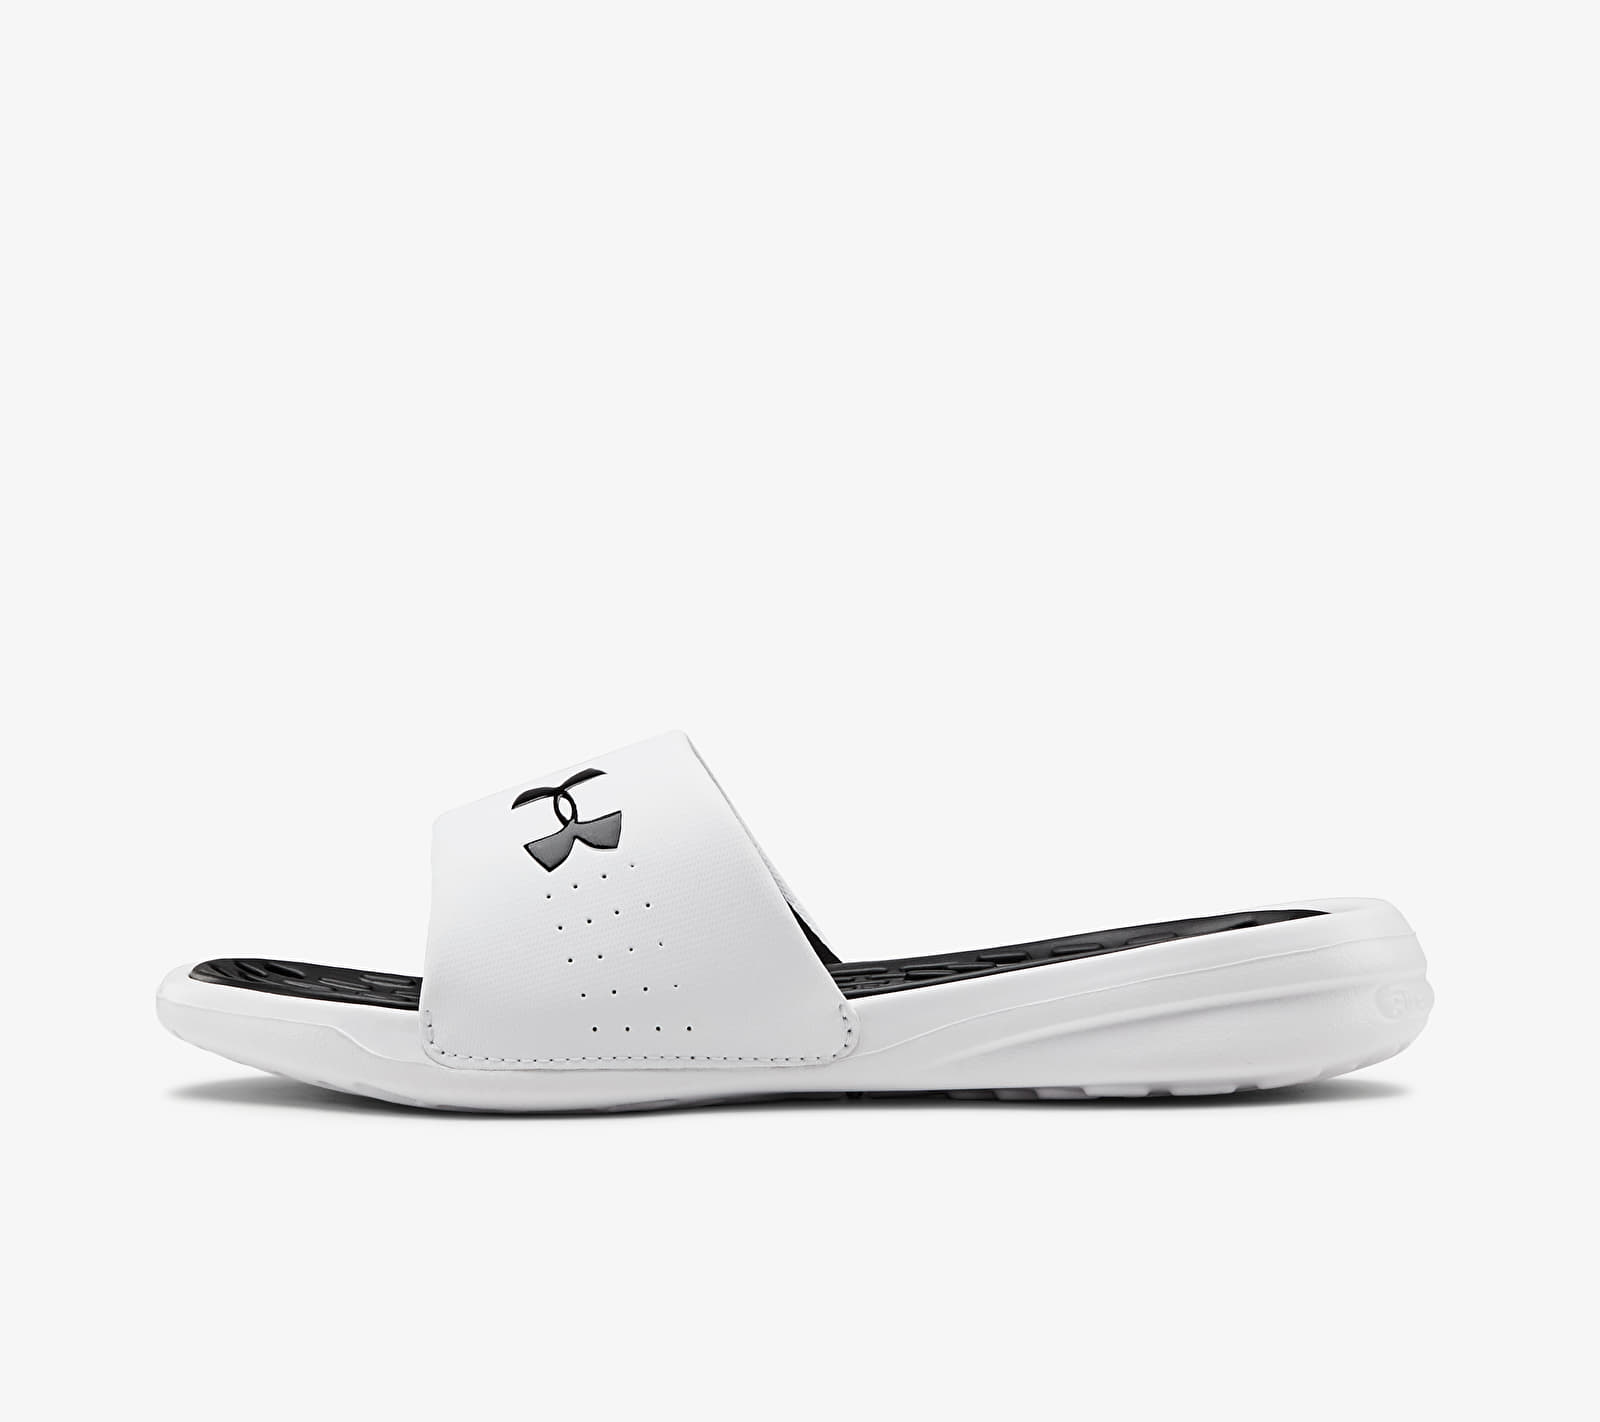 Under Armour W Playmaker Fix SL White 3000063-101